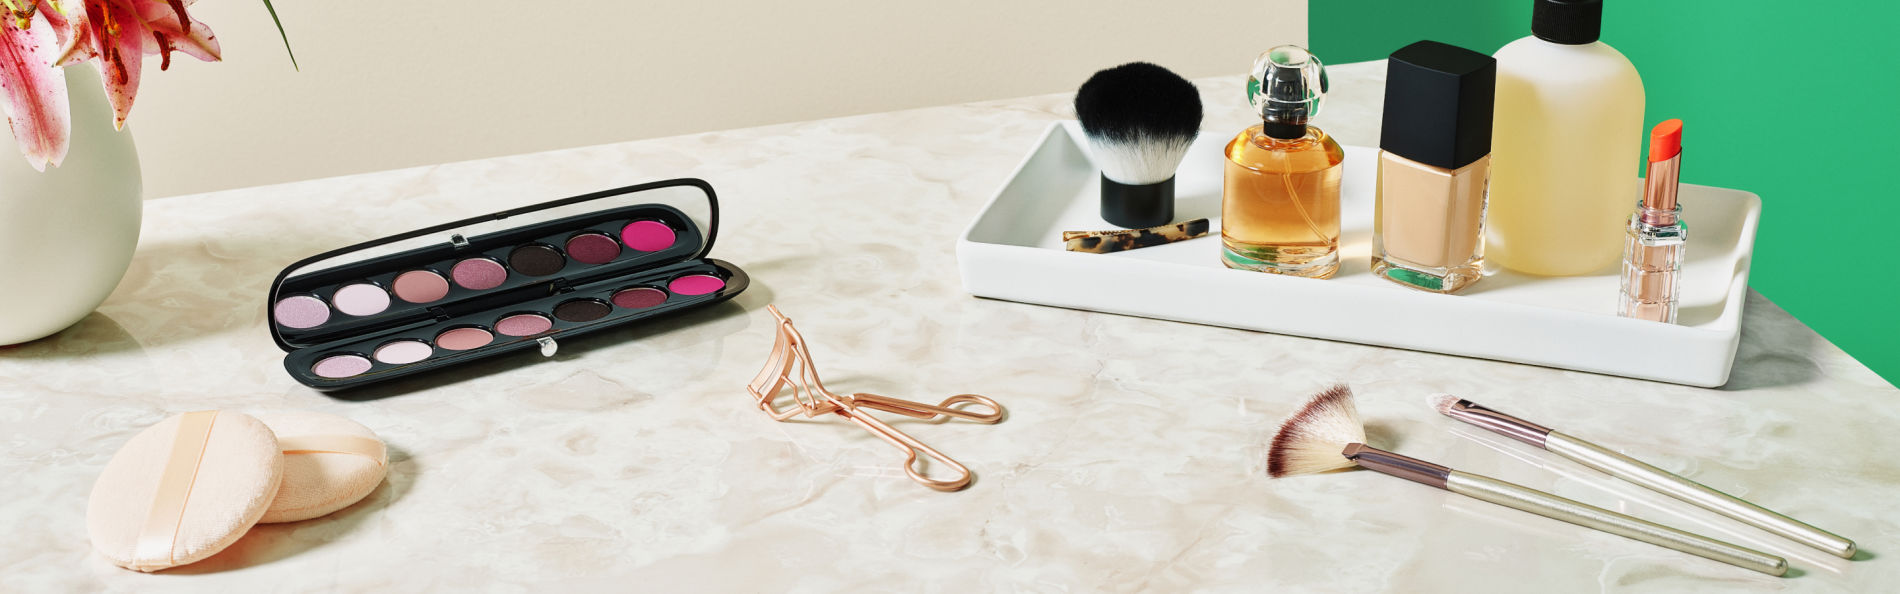 image of makeup case, perfume and brushes